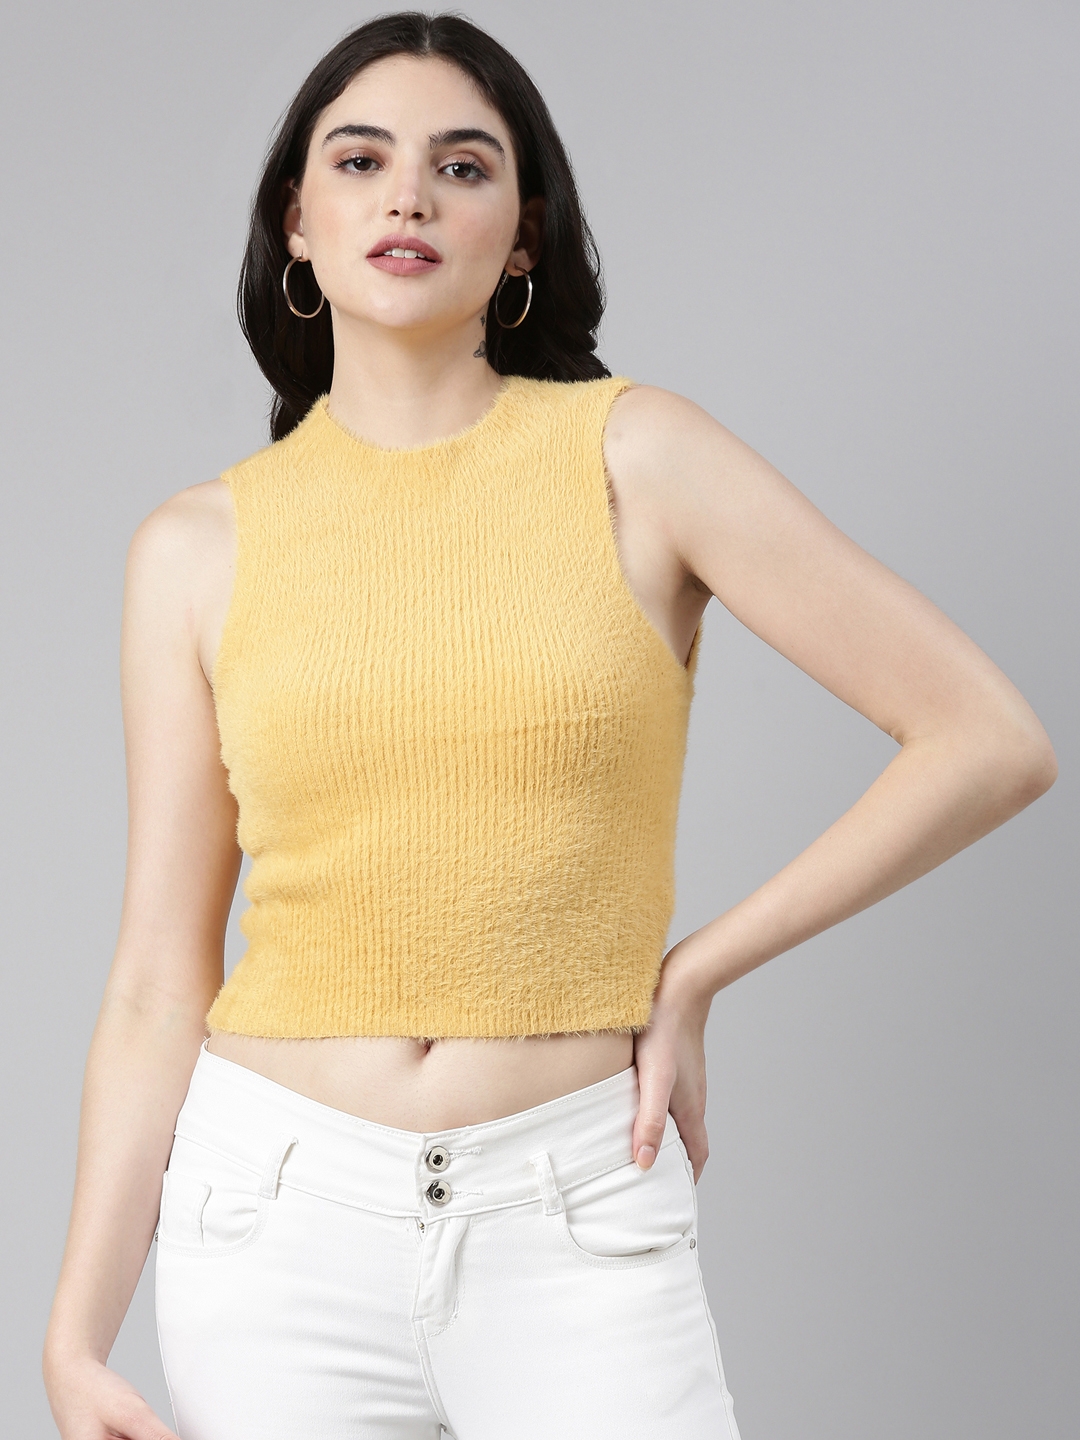 Showoff | SHOWOFF Women's High Neck Solid Sleeveless Mustard Tank Top 1